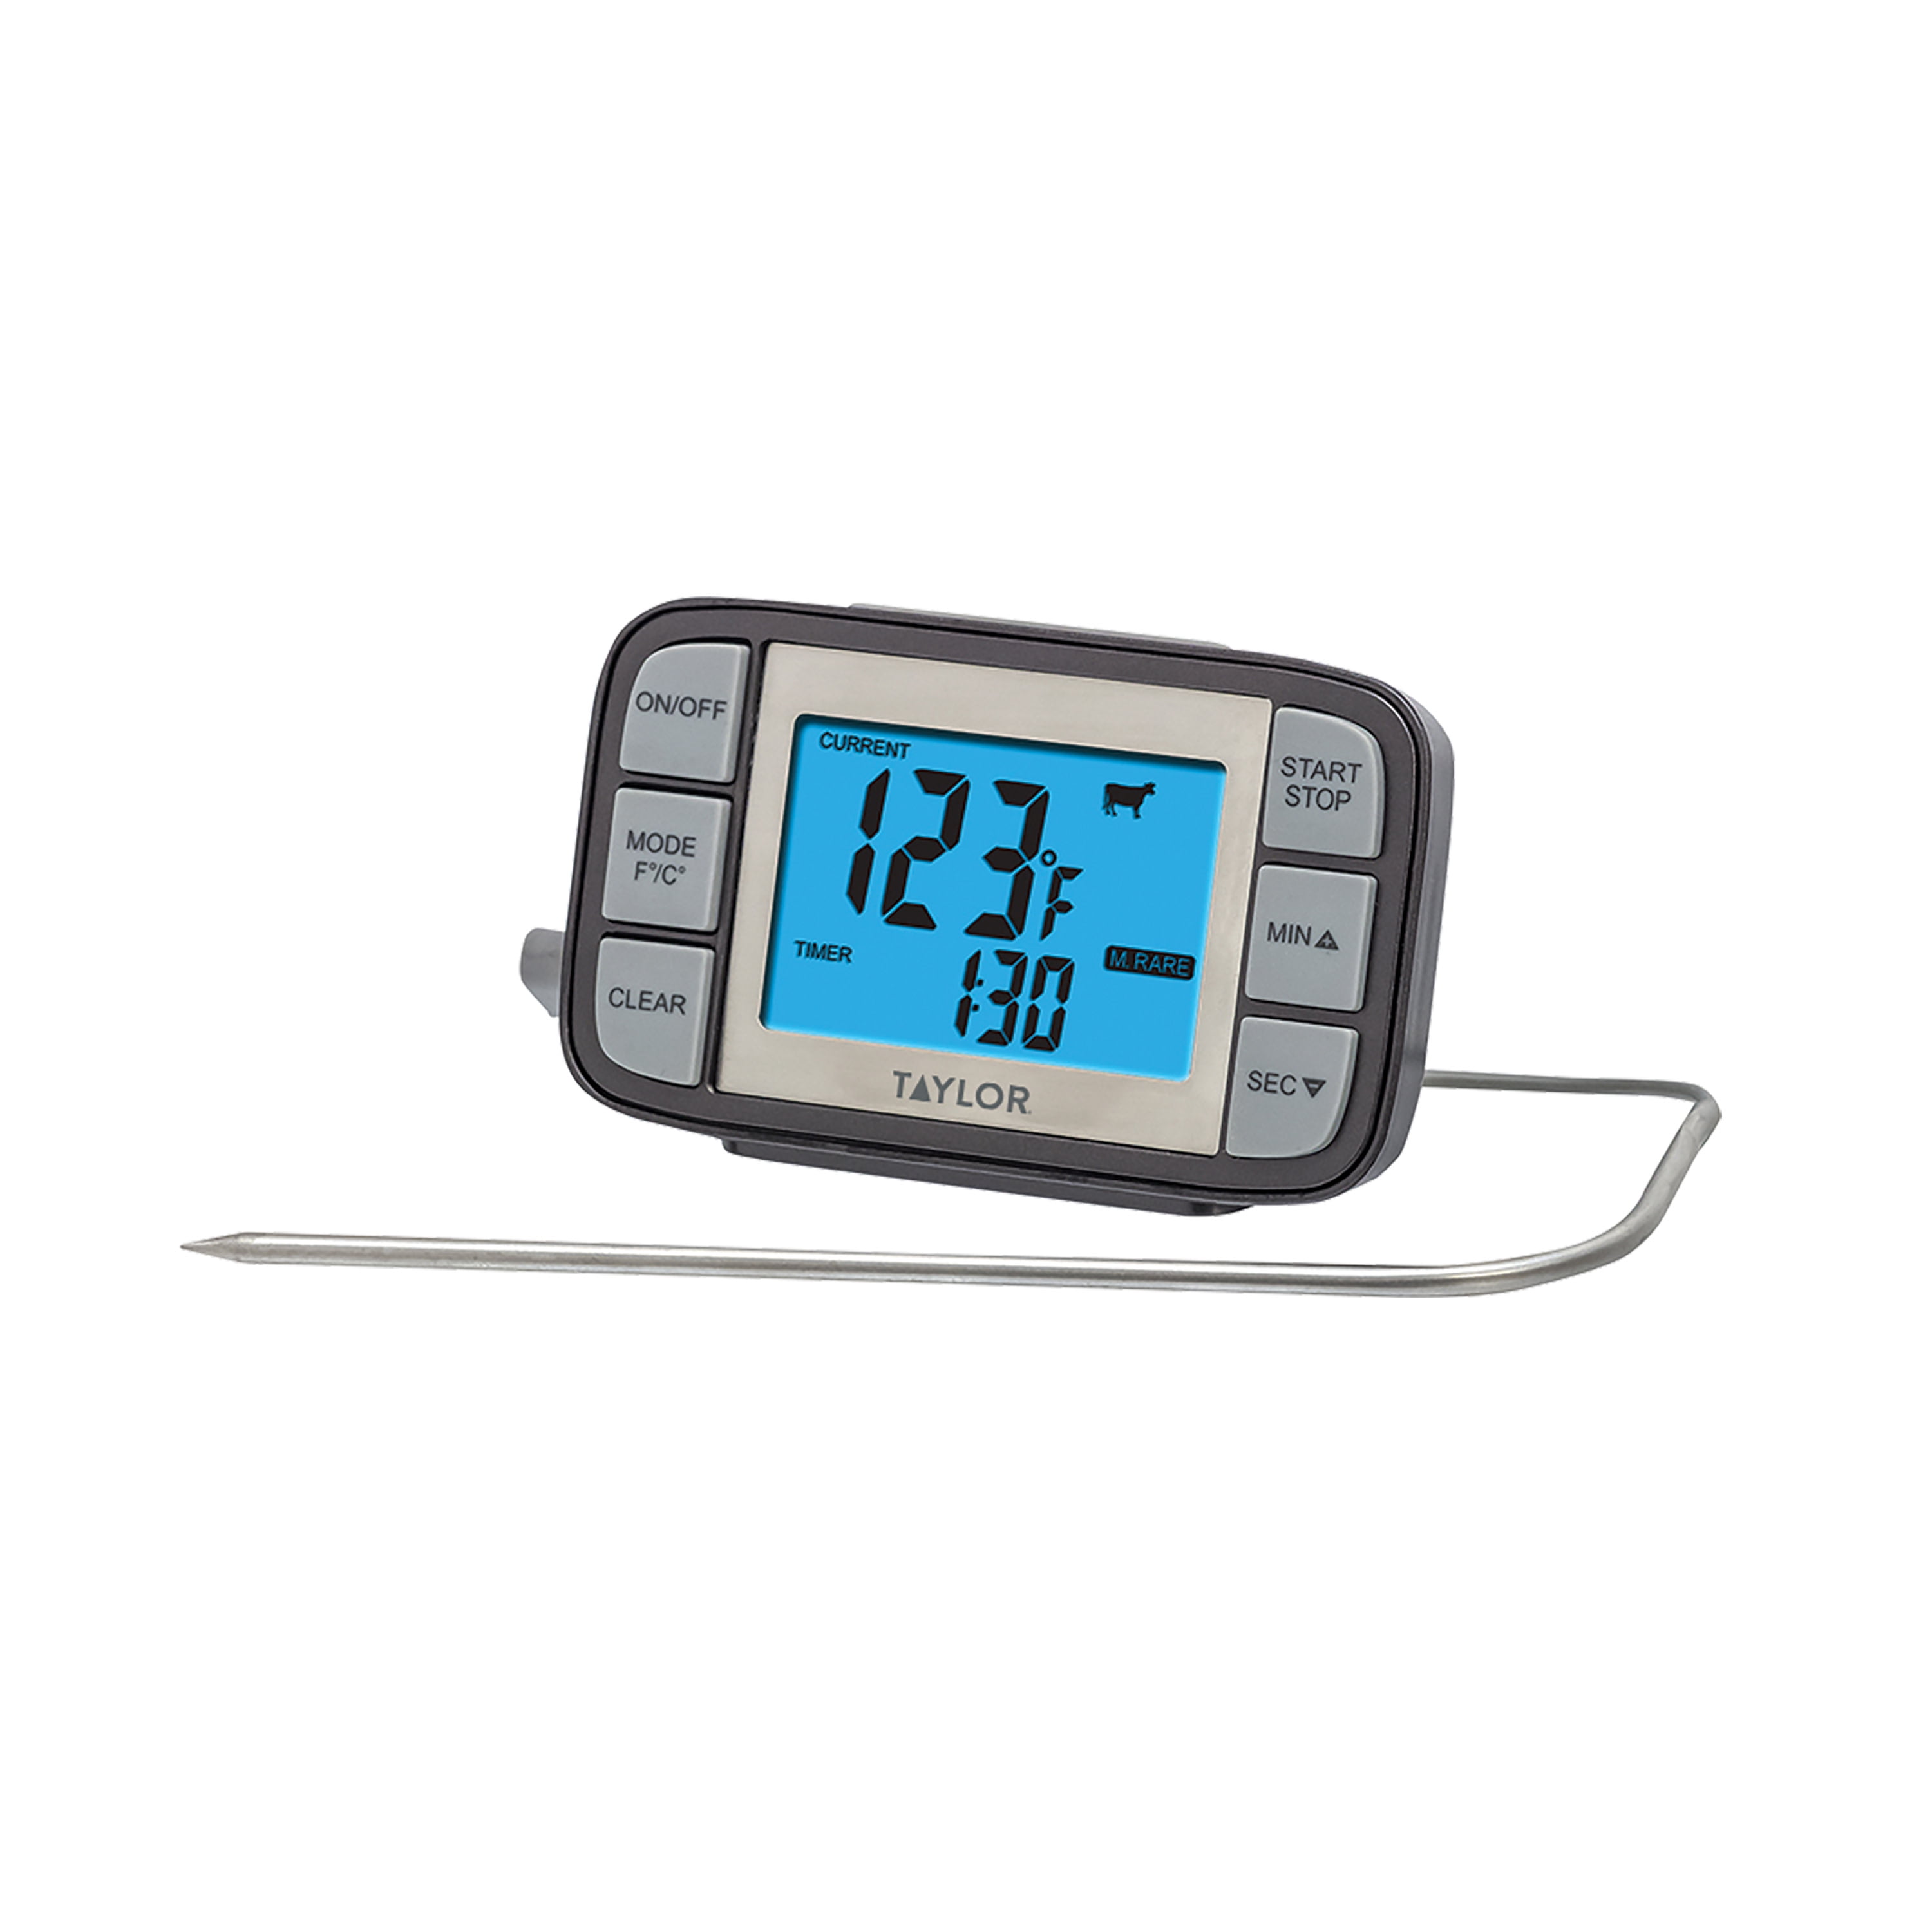 Taylor Compact Waterproof Digital Pen Meat Thermometer with Cover Gray